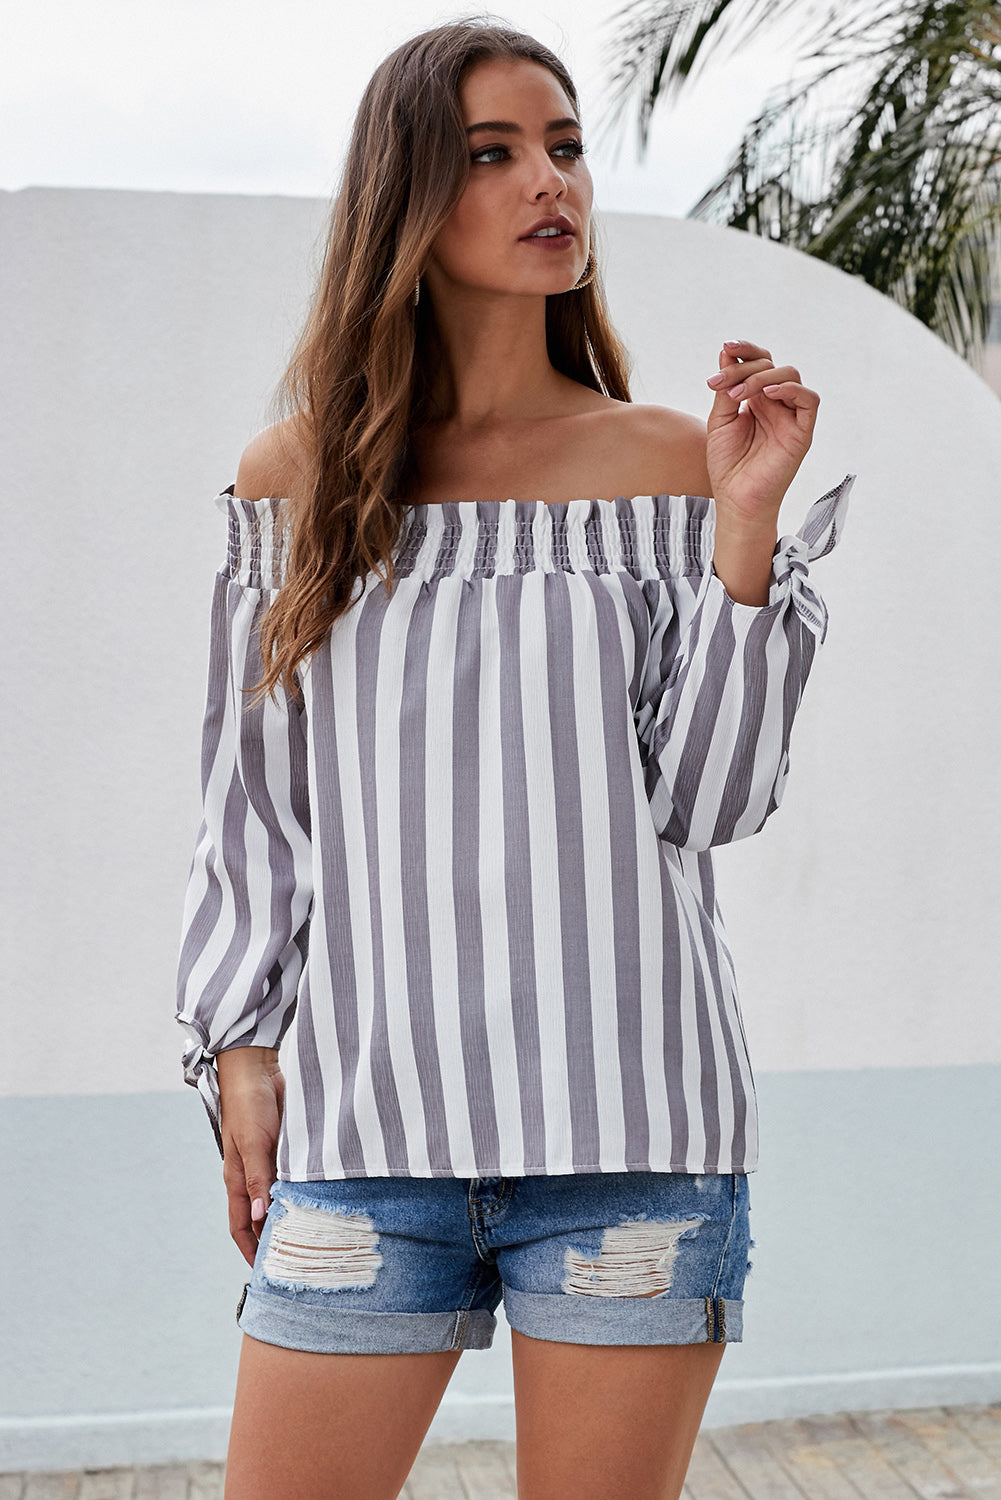 Blue And White Striped Off The Shoulder Top with Bowknot on Sleeves